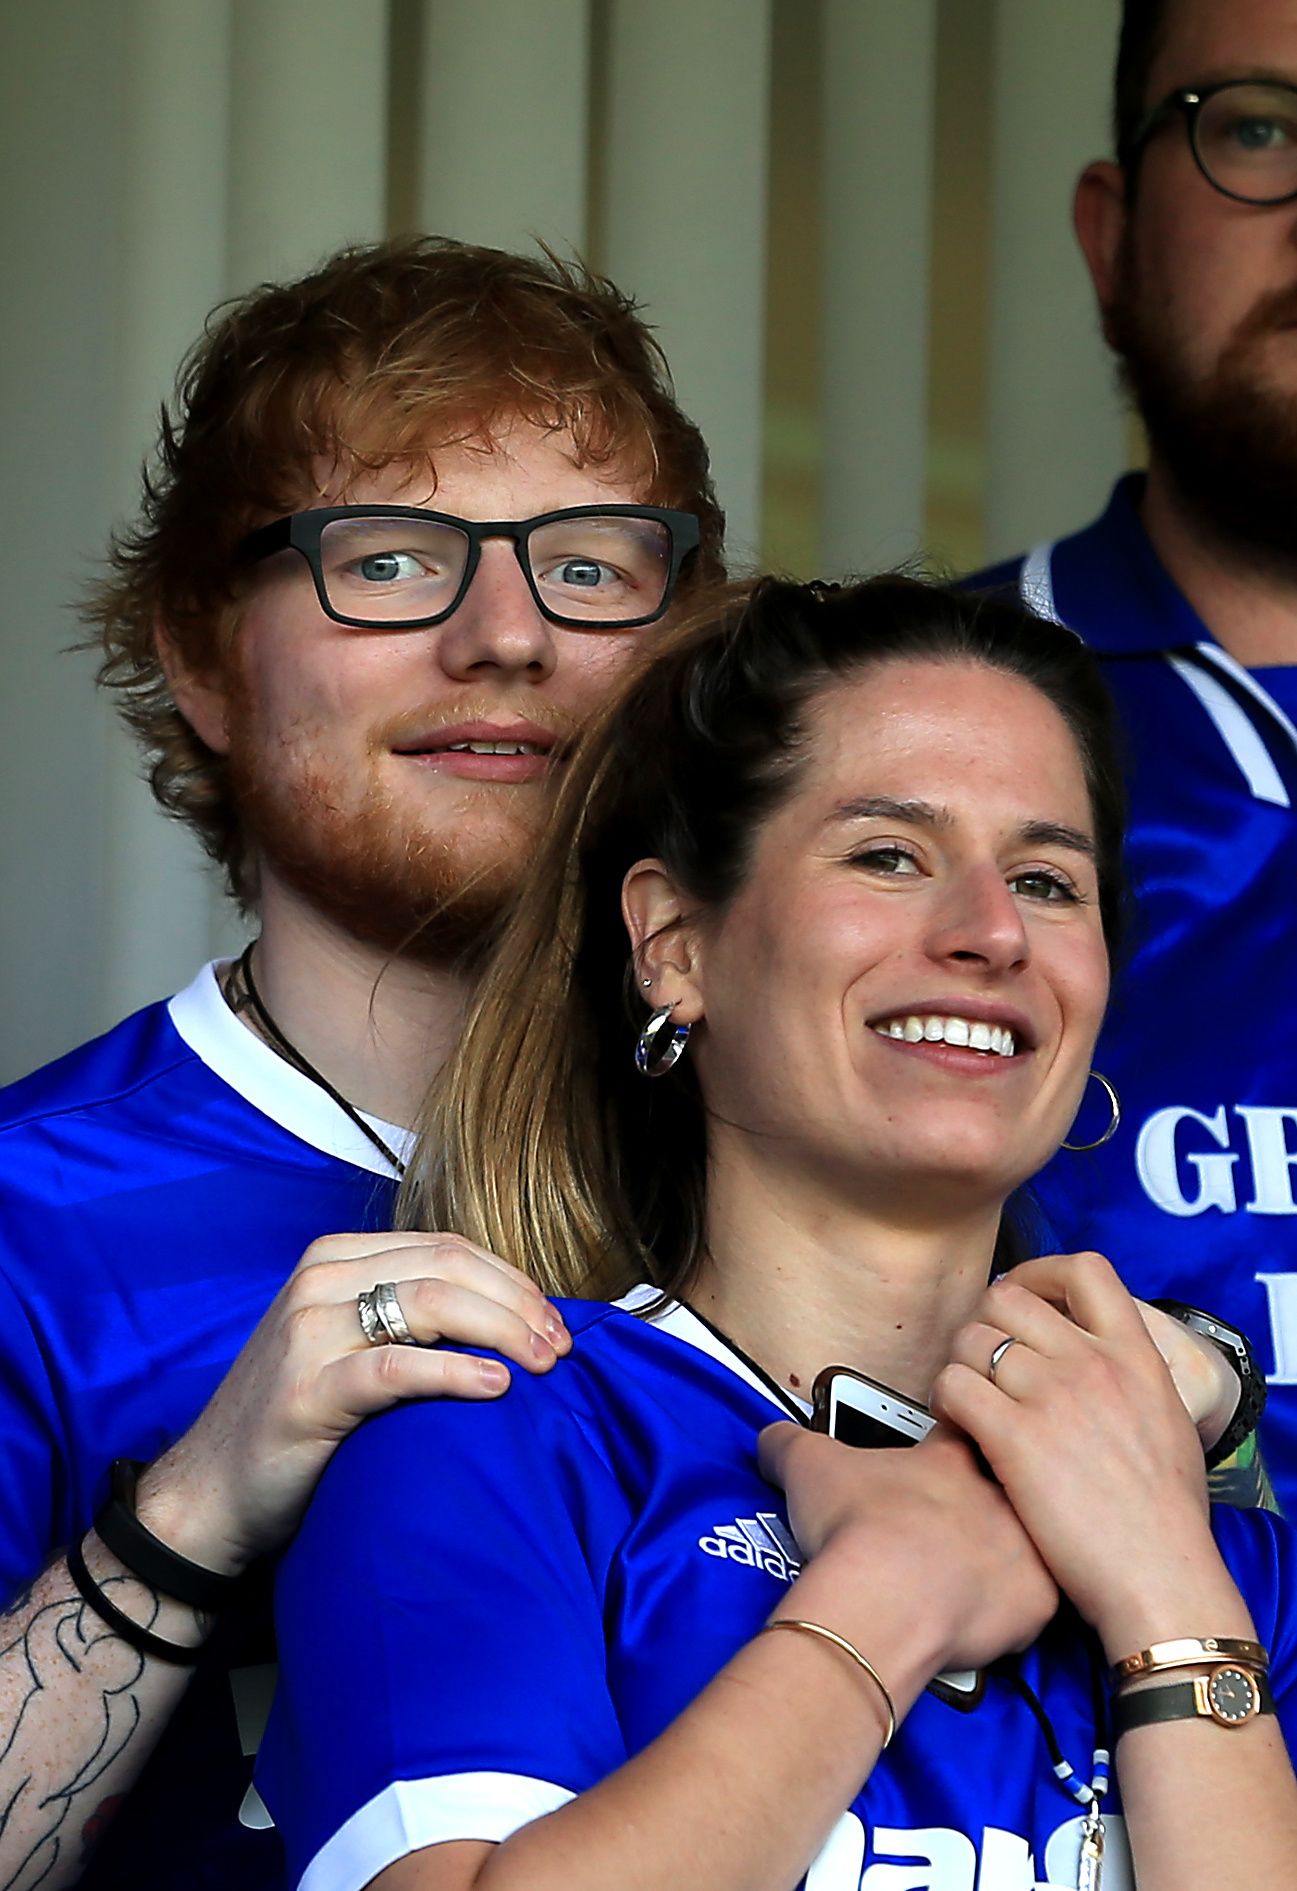 Ed Sheeran and wife Cherry Seaborn at the Sky Bet Championship match between Ipswich Town and Aston Villa at Portman Road on April 21, 2018 | Photo: Getty Images